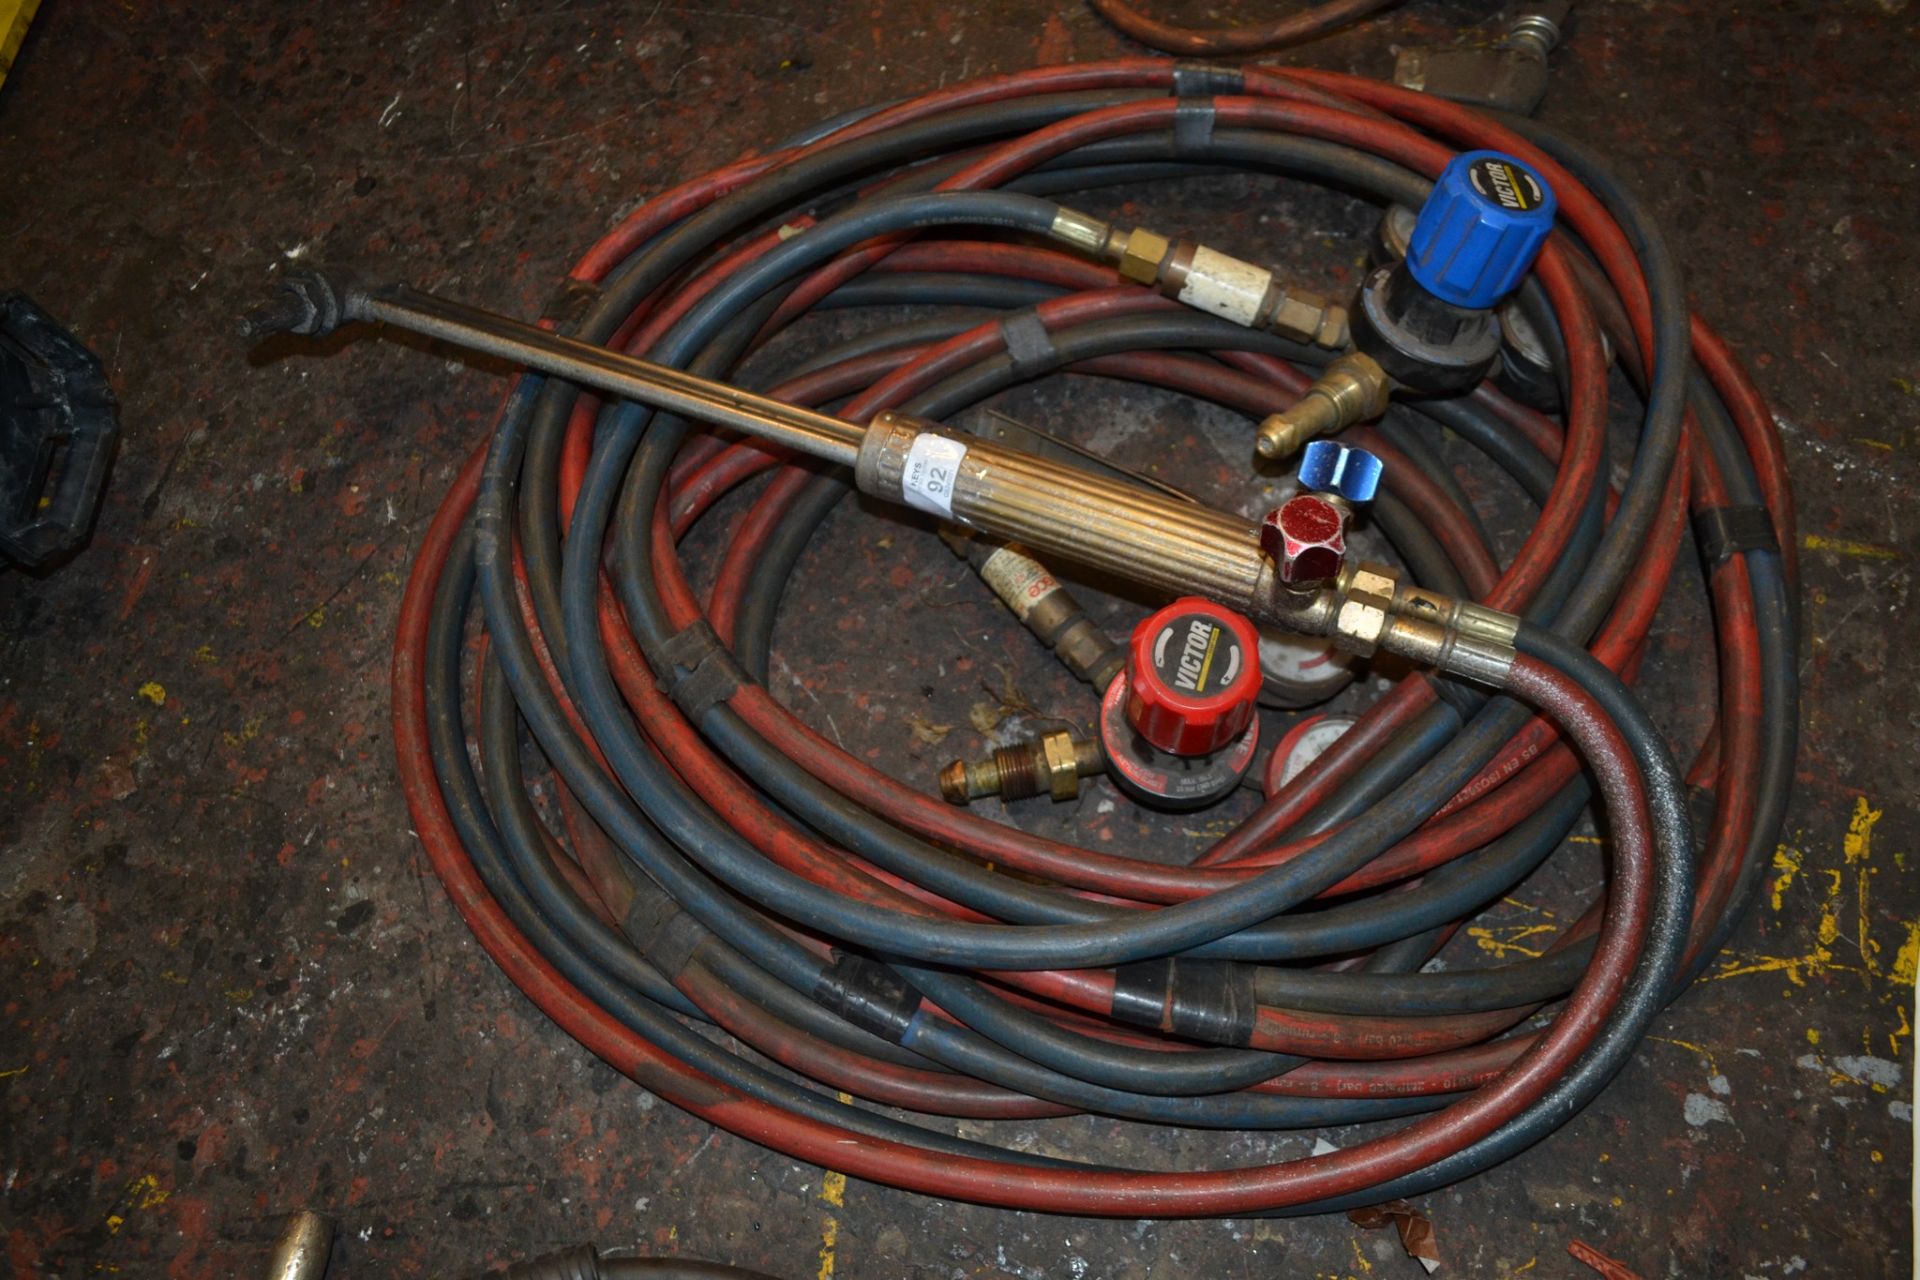 Oxy-acetylene torch and gauges